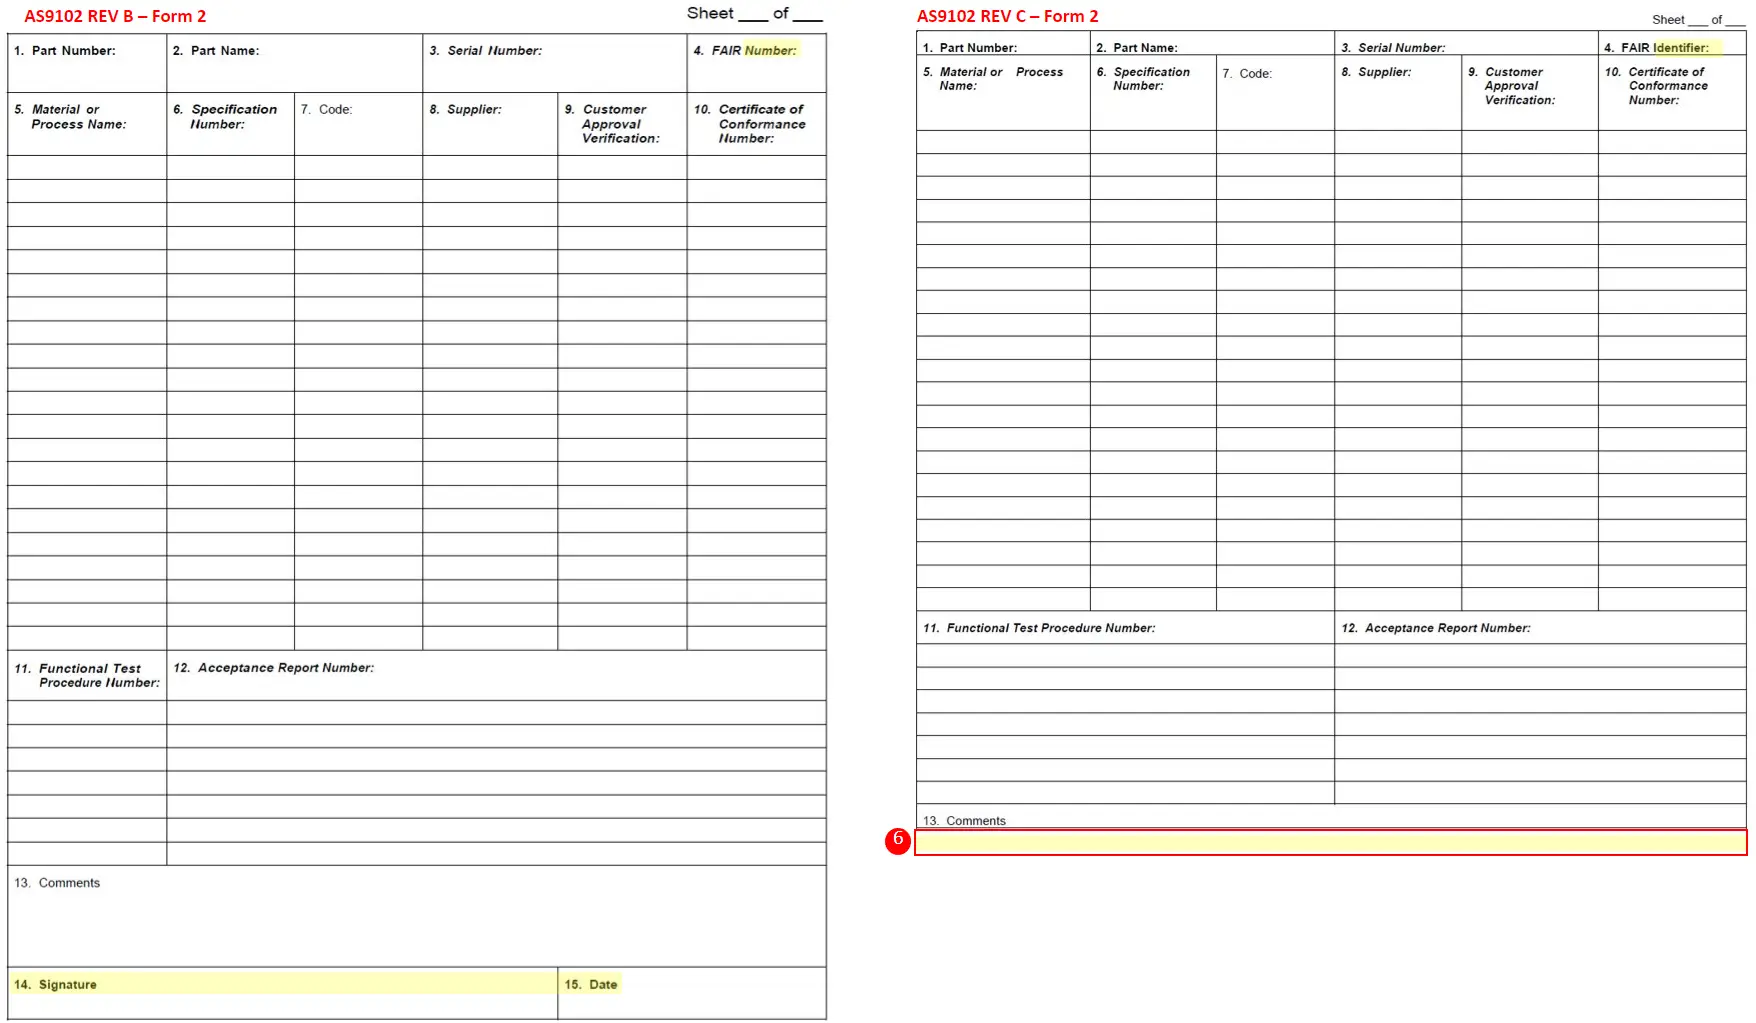 Comparison between AS9102b vs AS9102c Form 2